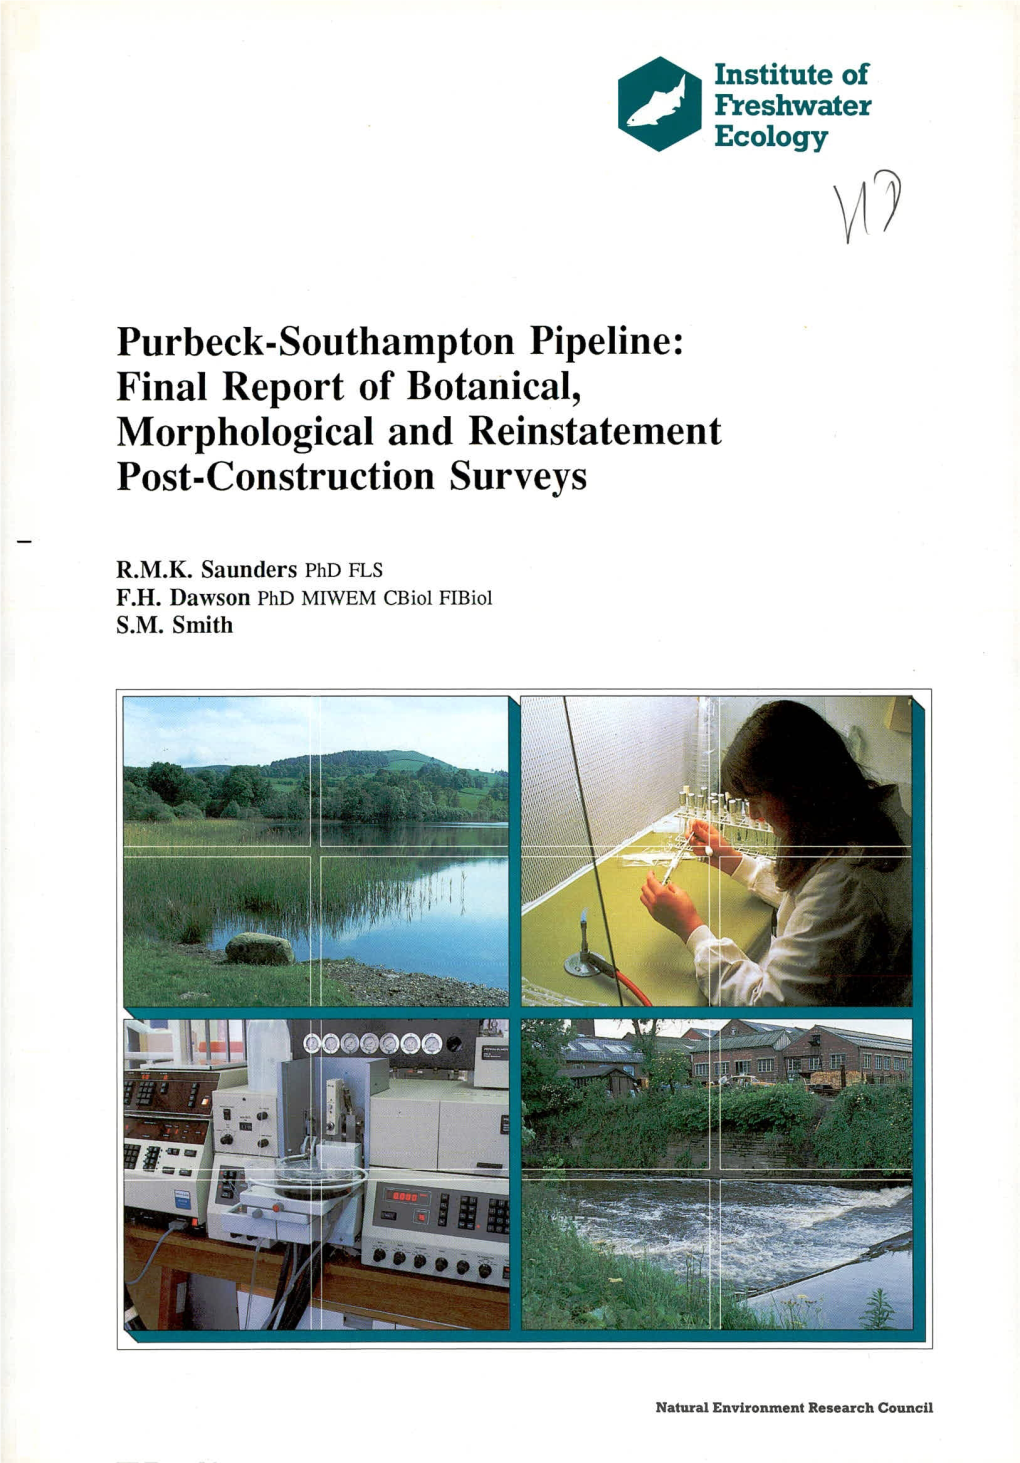 Purbeck-Southampton Pipeline: Final Report of Botanical, Morphological and Reinstatement Post-Construction Surveys